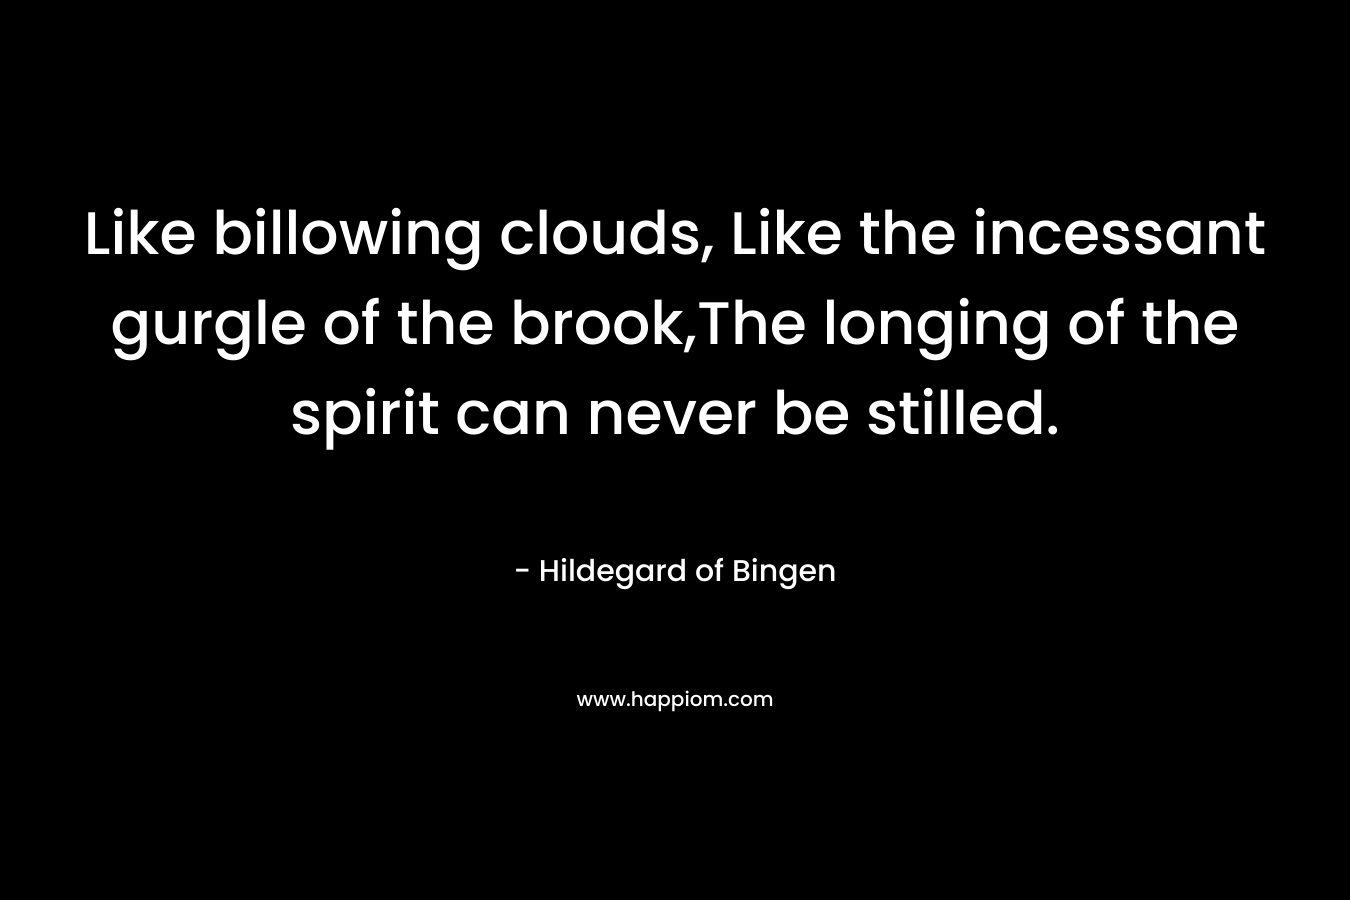 Like billowing clouds, Like the incessant gurgle of the brook,The longing of the spirit can never be stilled.